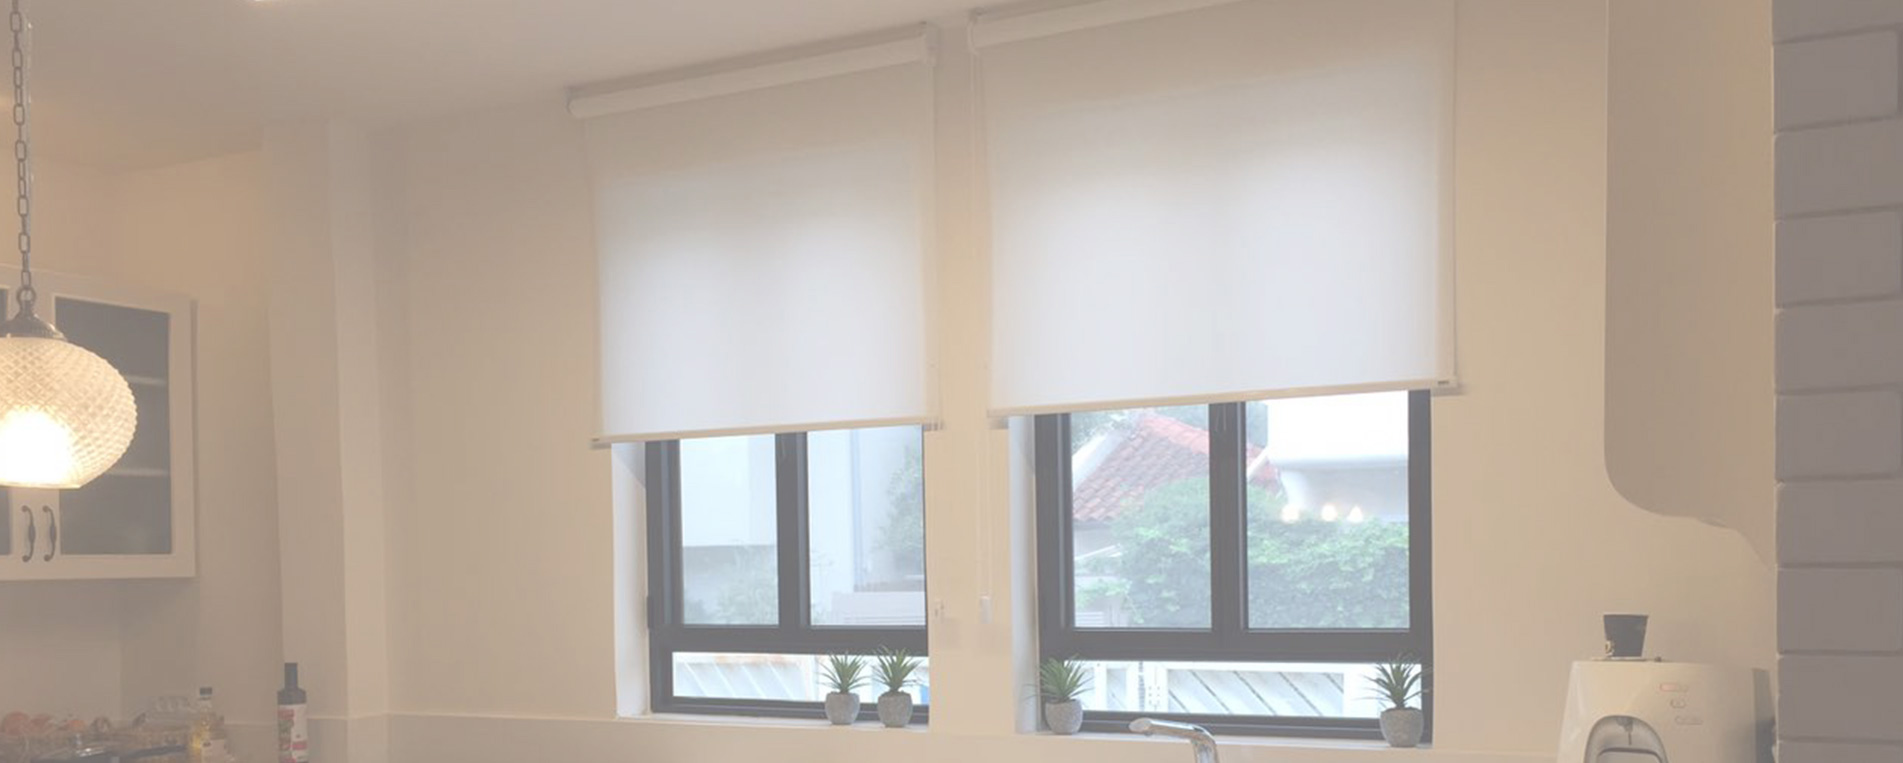 Frequently Asked Window Coverings Questions